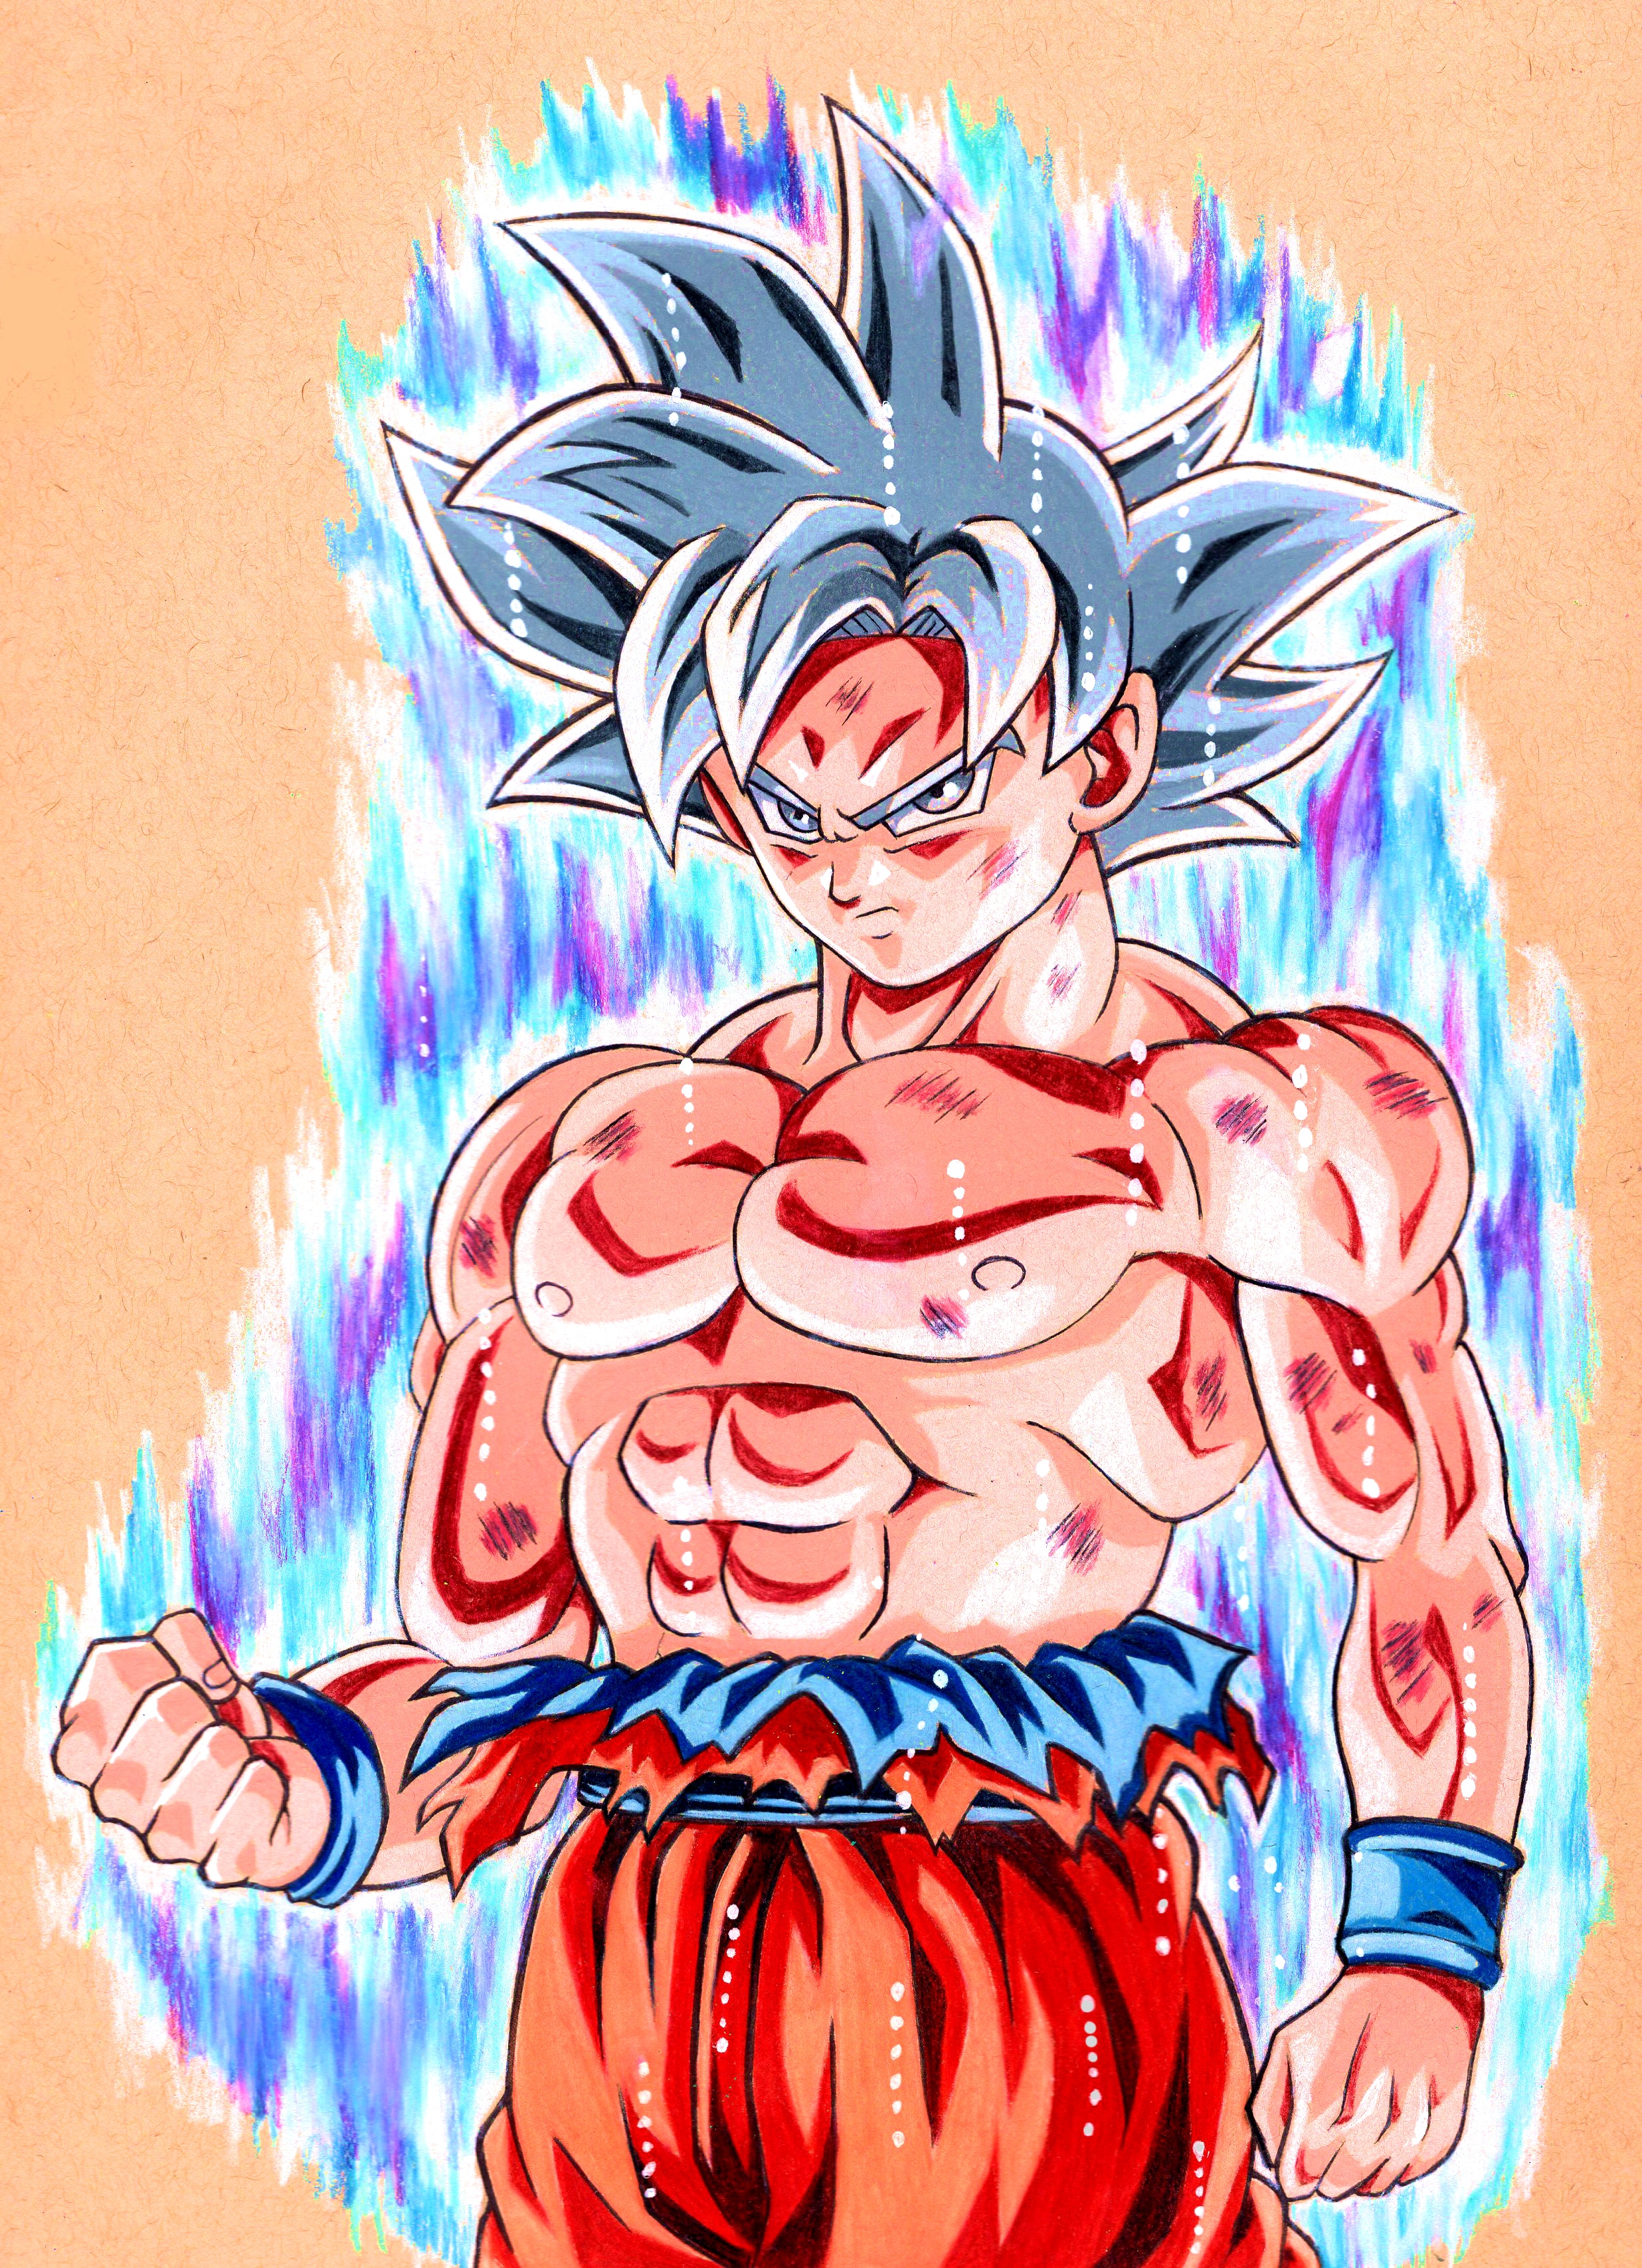 Drawing of ultra instinct goku. NO reference used. : r/dbz